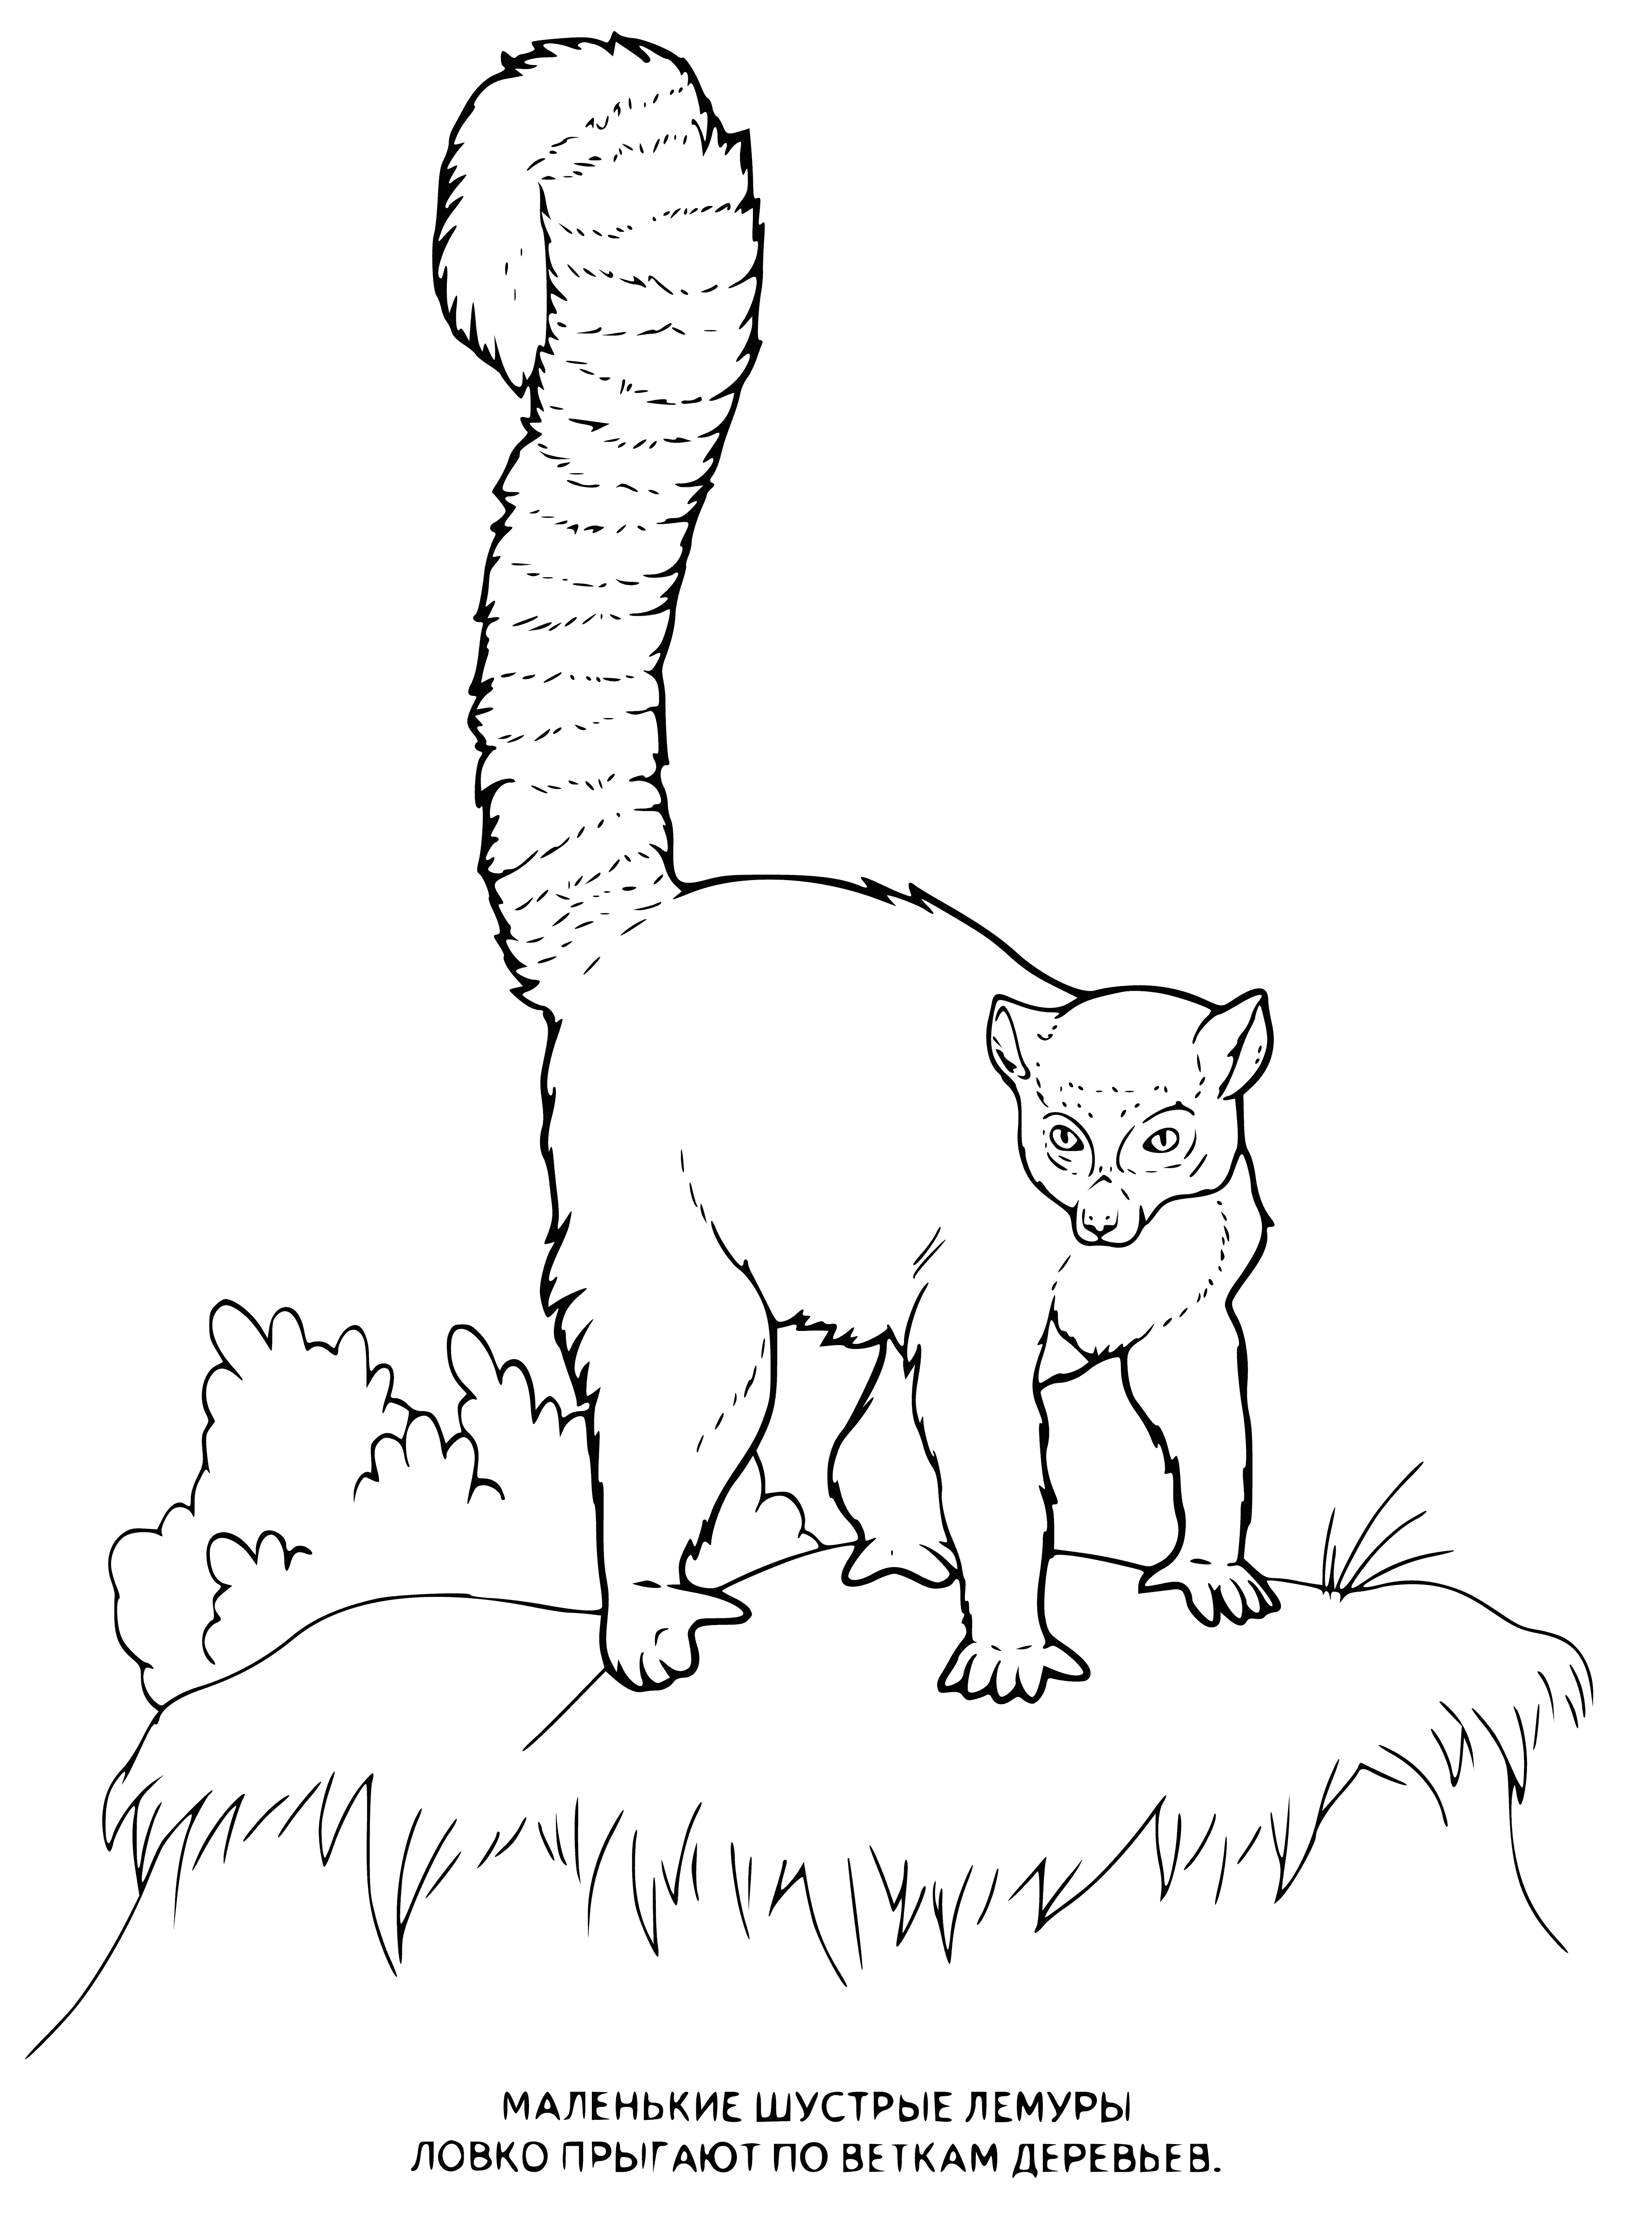 coloring page: Lemurs are small, furry animals found mainly in Madagascar with 100+ varieties in sizes from cats to mice. They have big eyes and come in colors like brown, white, and black.